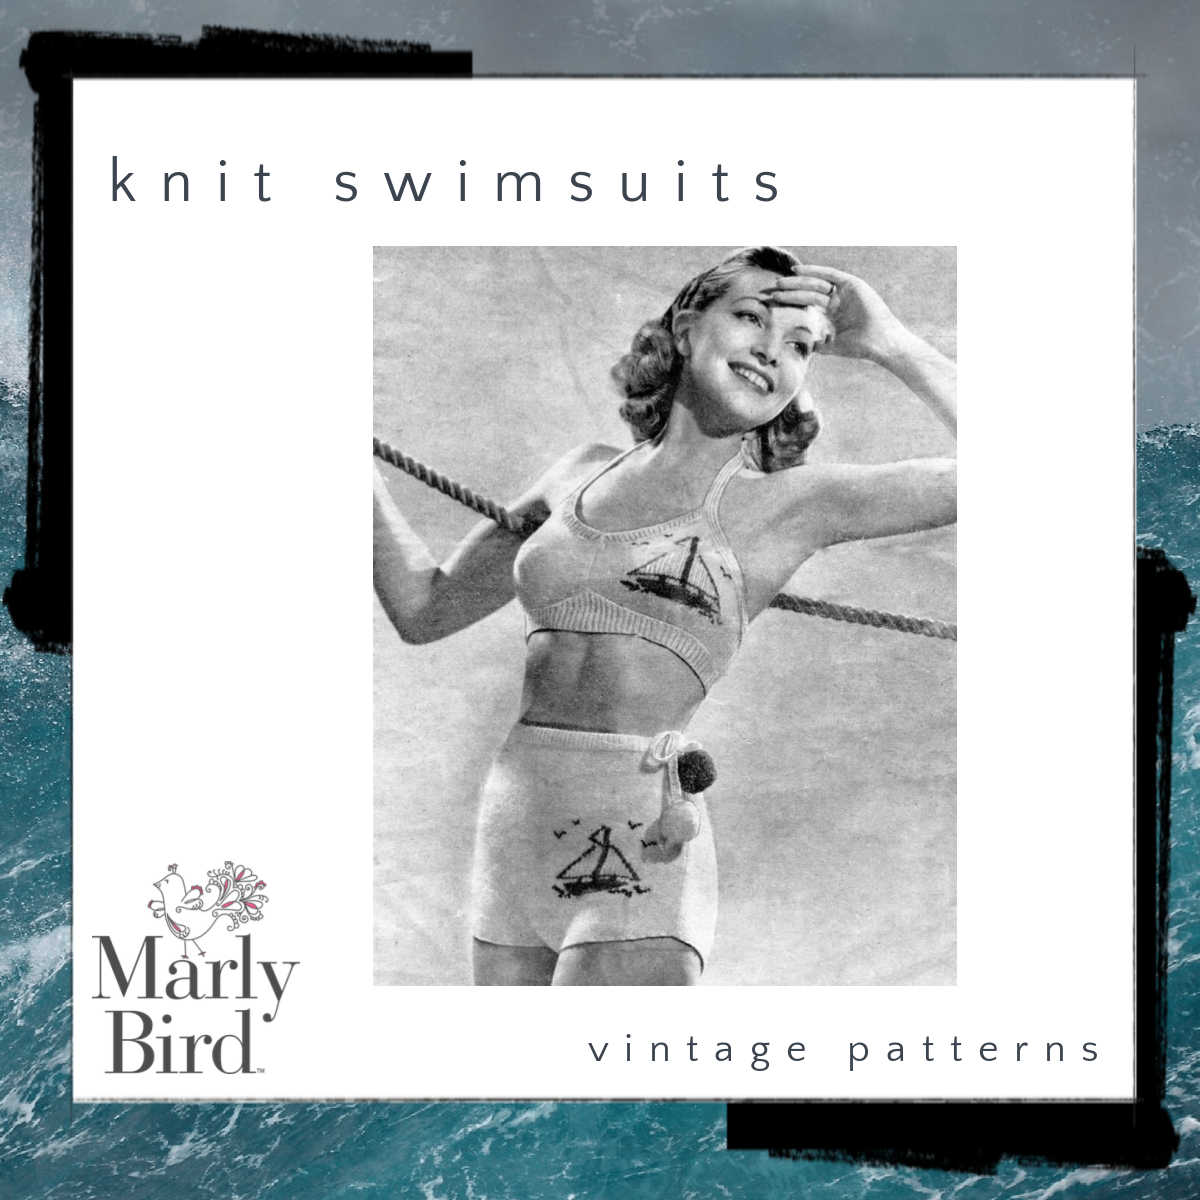 Vintage knitting patterns for mens swimming trunks and bathing suits -  Vintage patterns and making